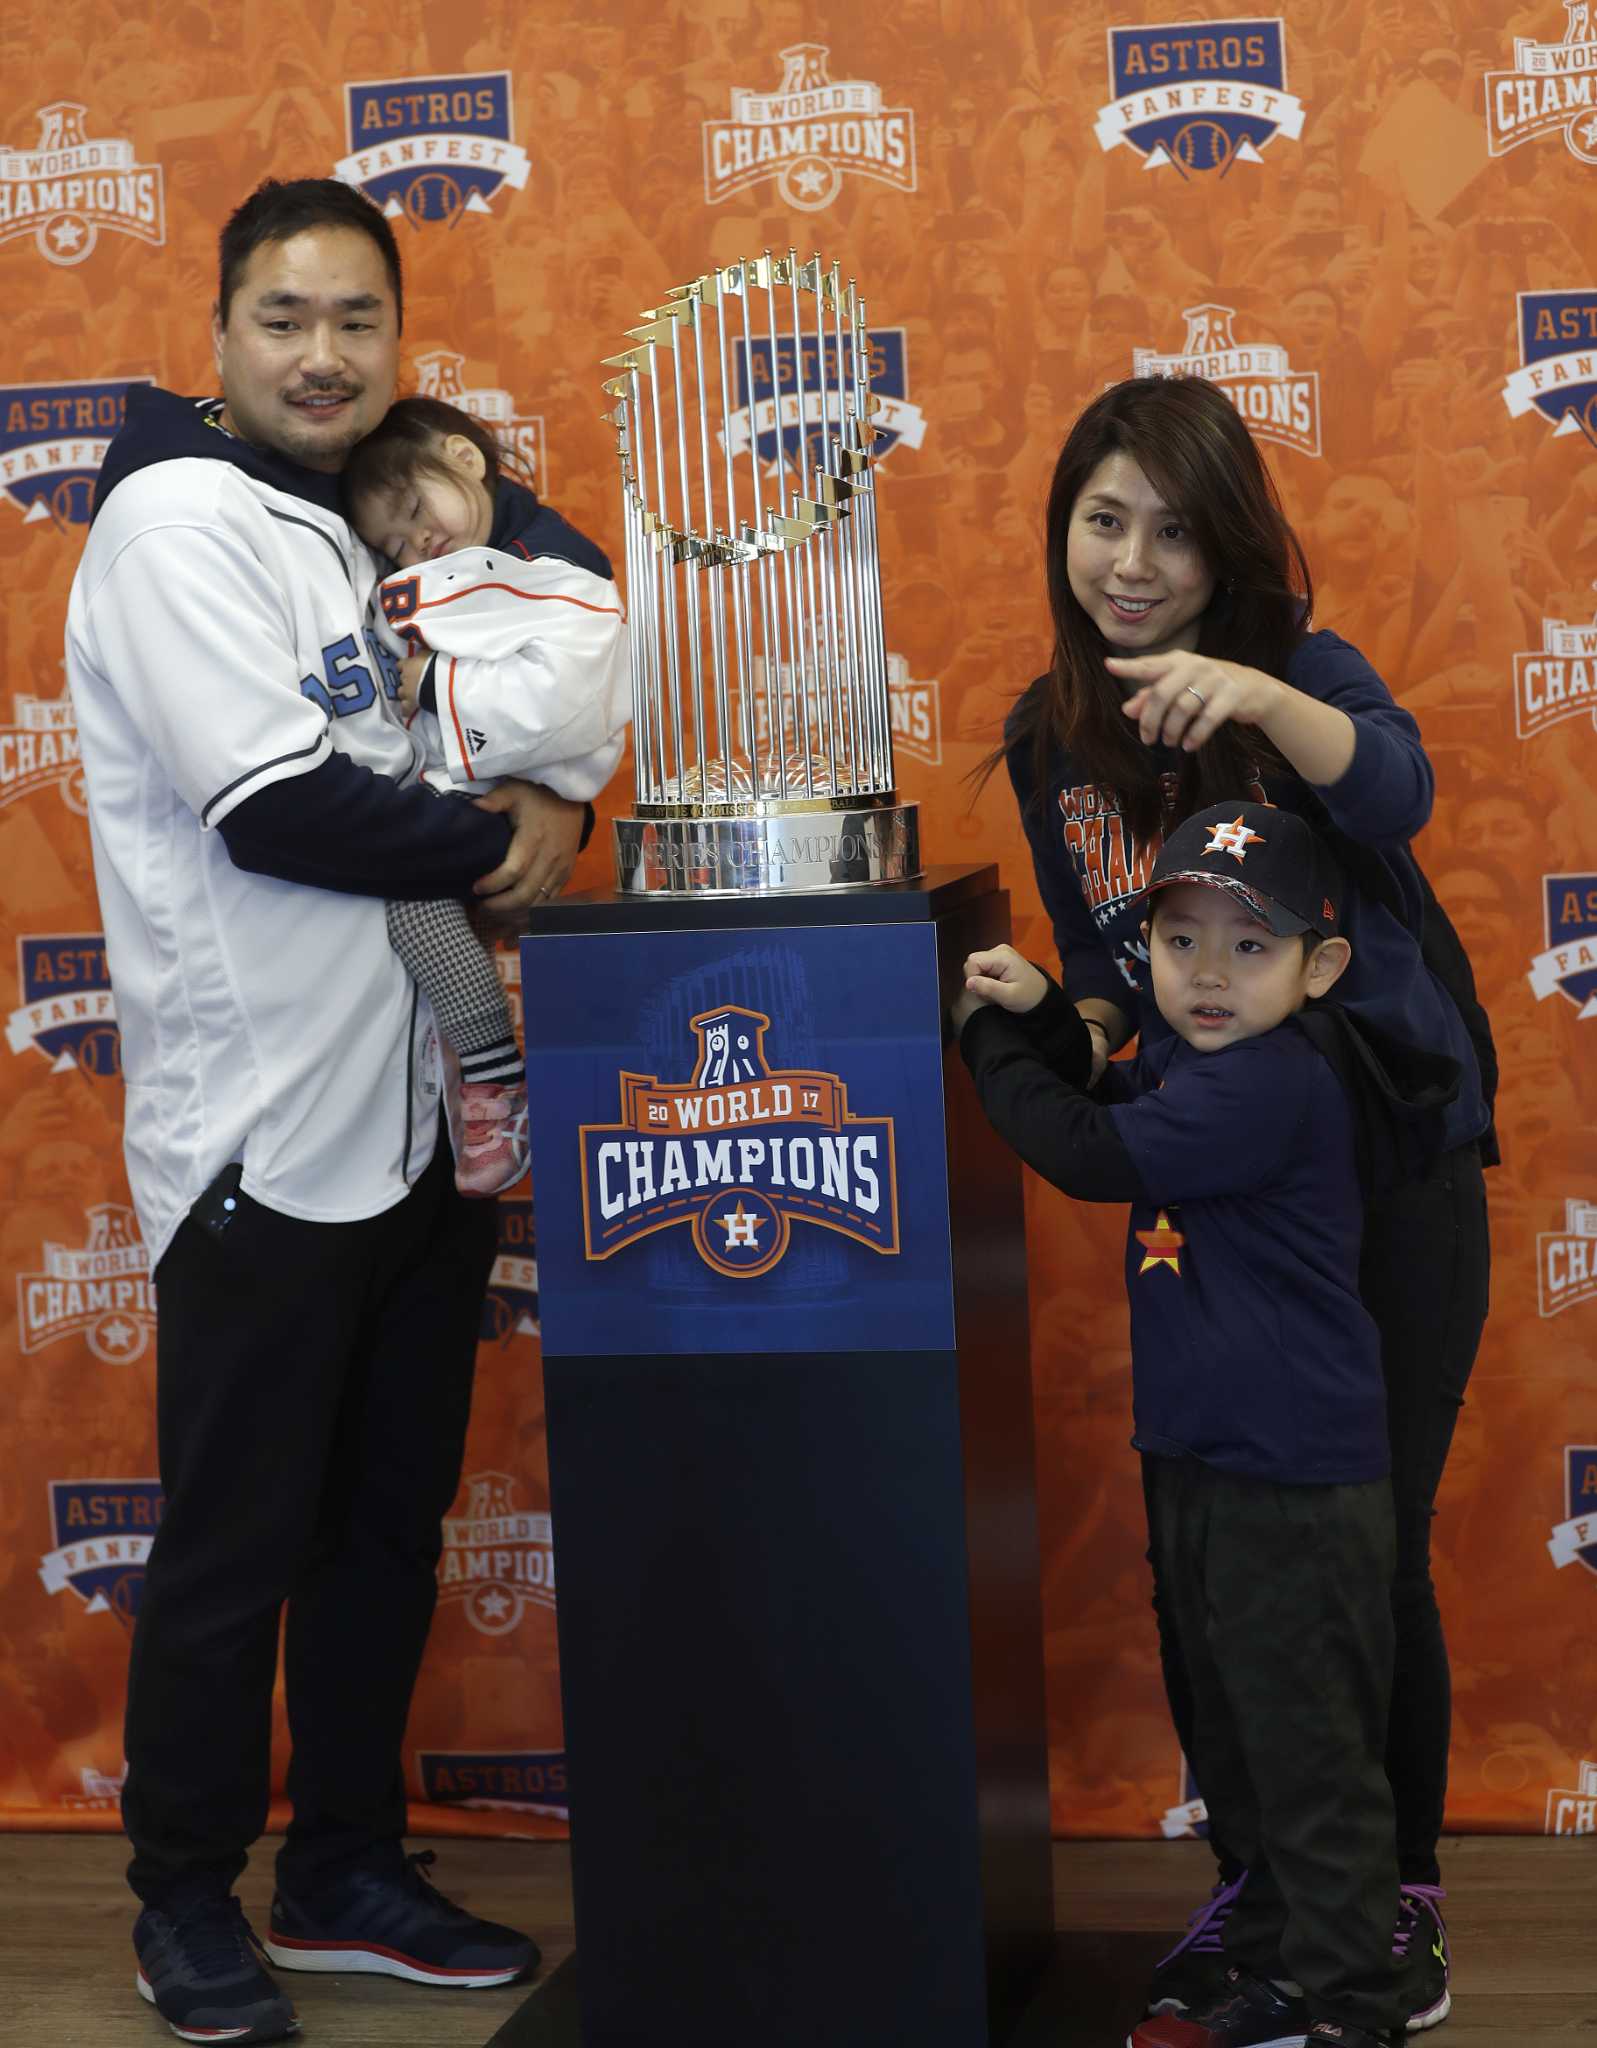 Astros fans get close with players, trophy during FanFest